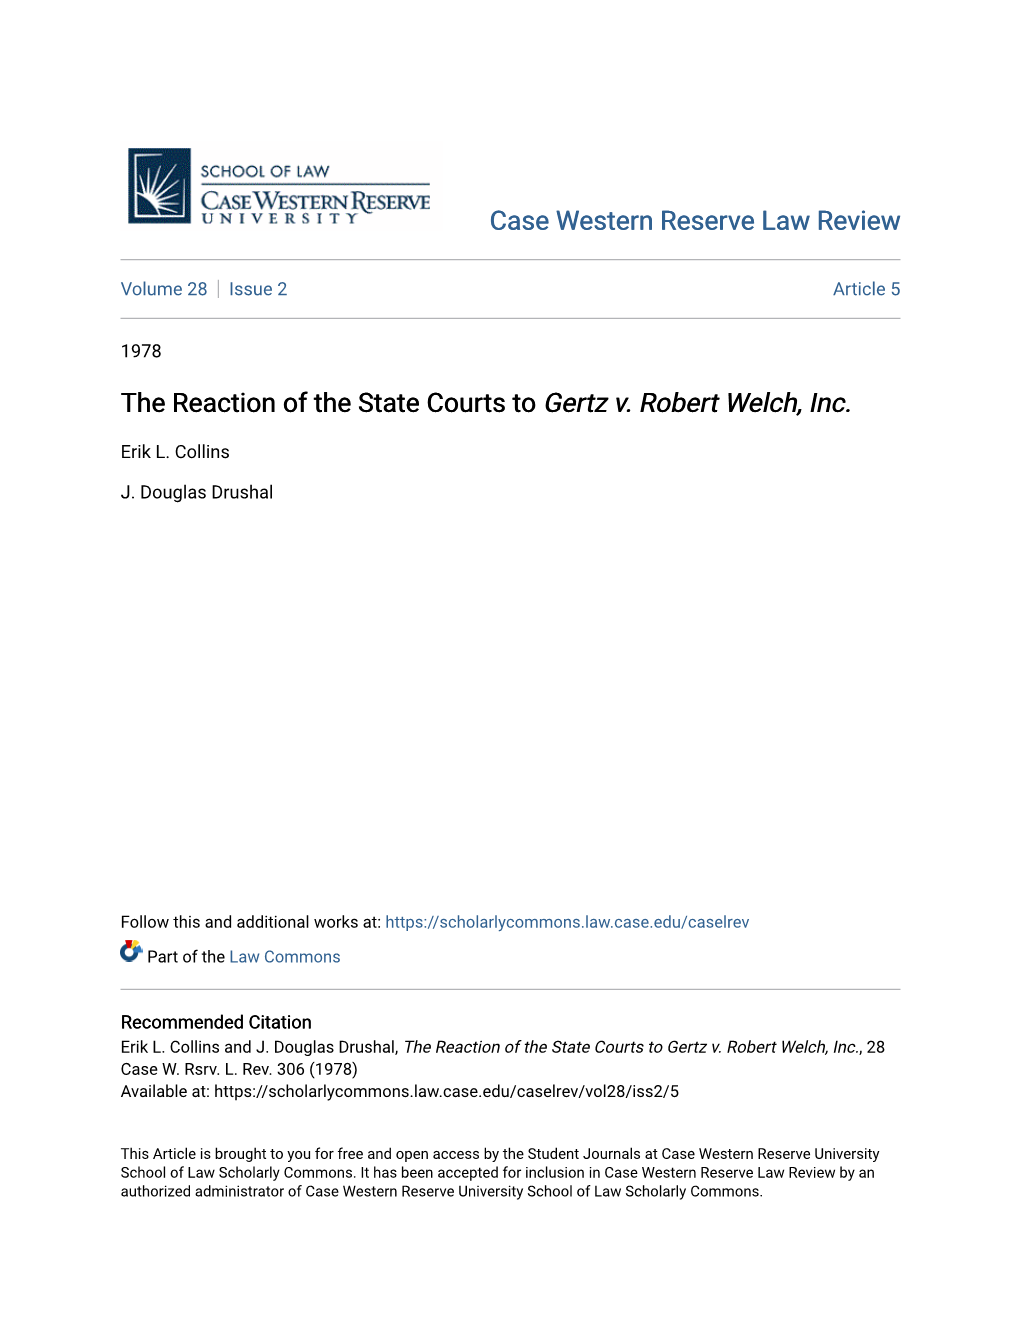 The Reaction of the State Courts to &lt;I&gt;Gertz V. Robert Welch, Inc.&lt;/I&gt;